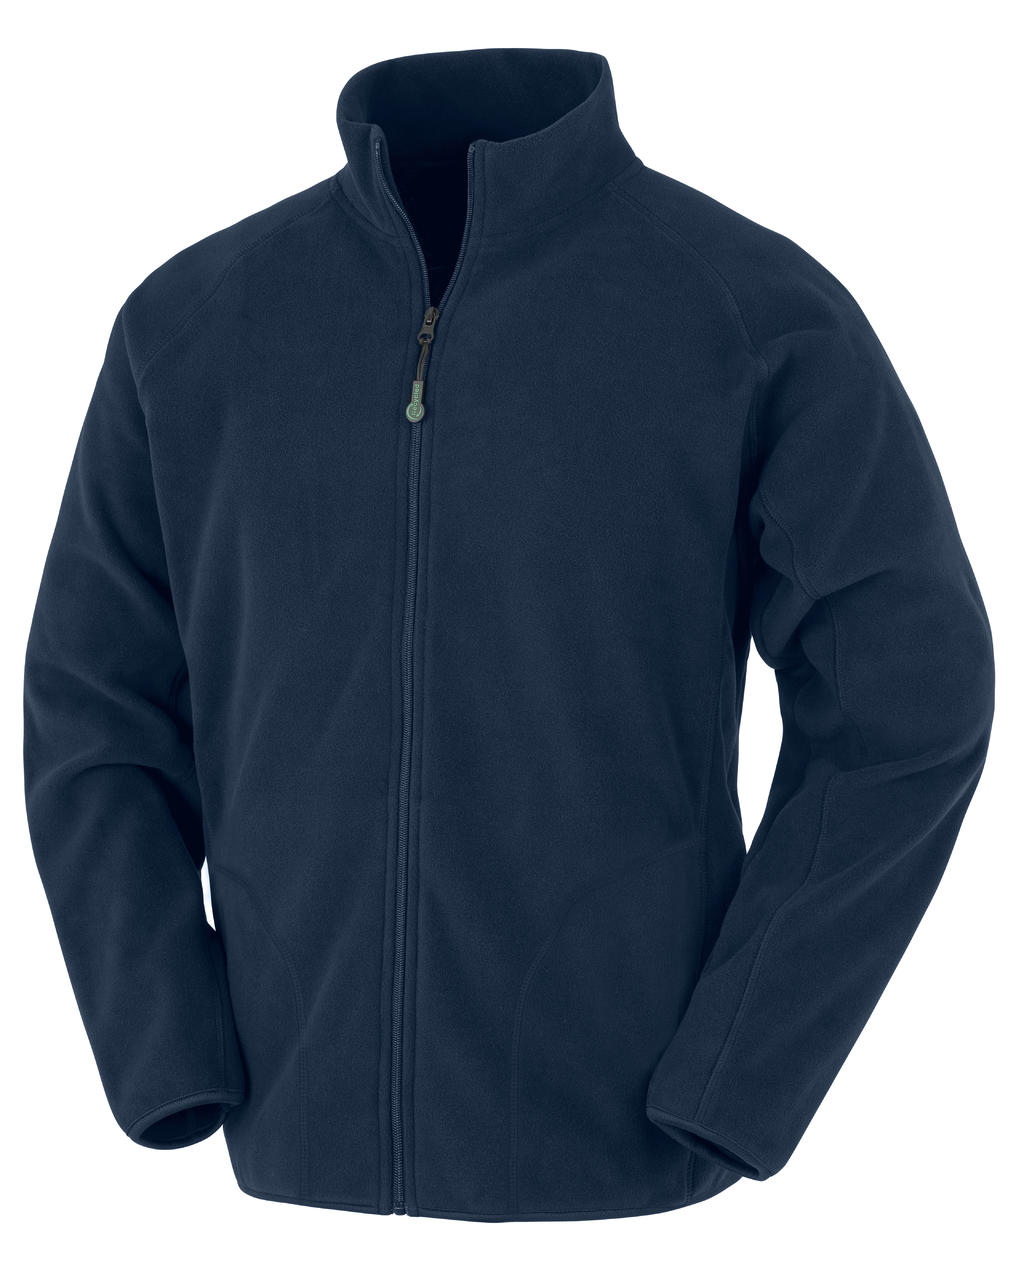  Recycled Microfleece Jacket in Farbe Navy